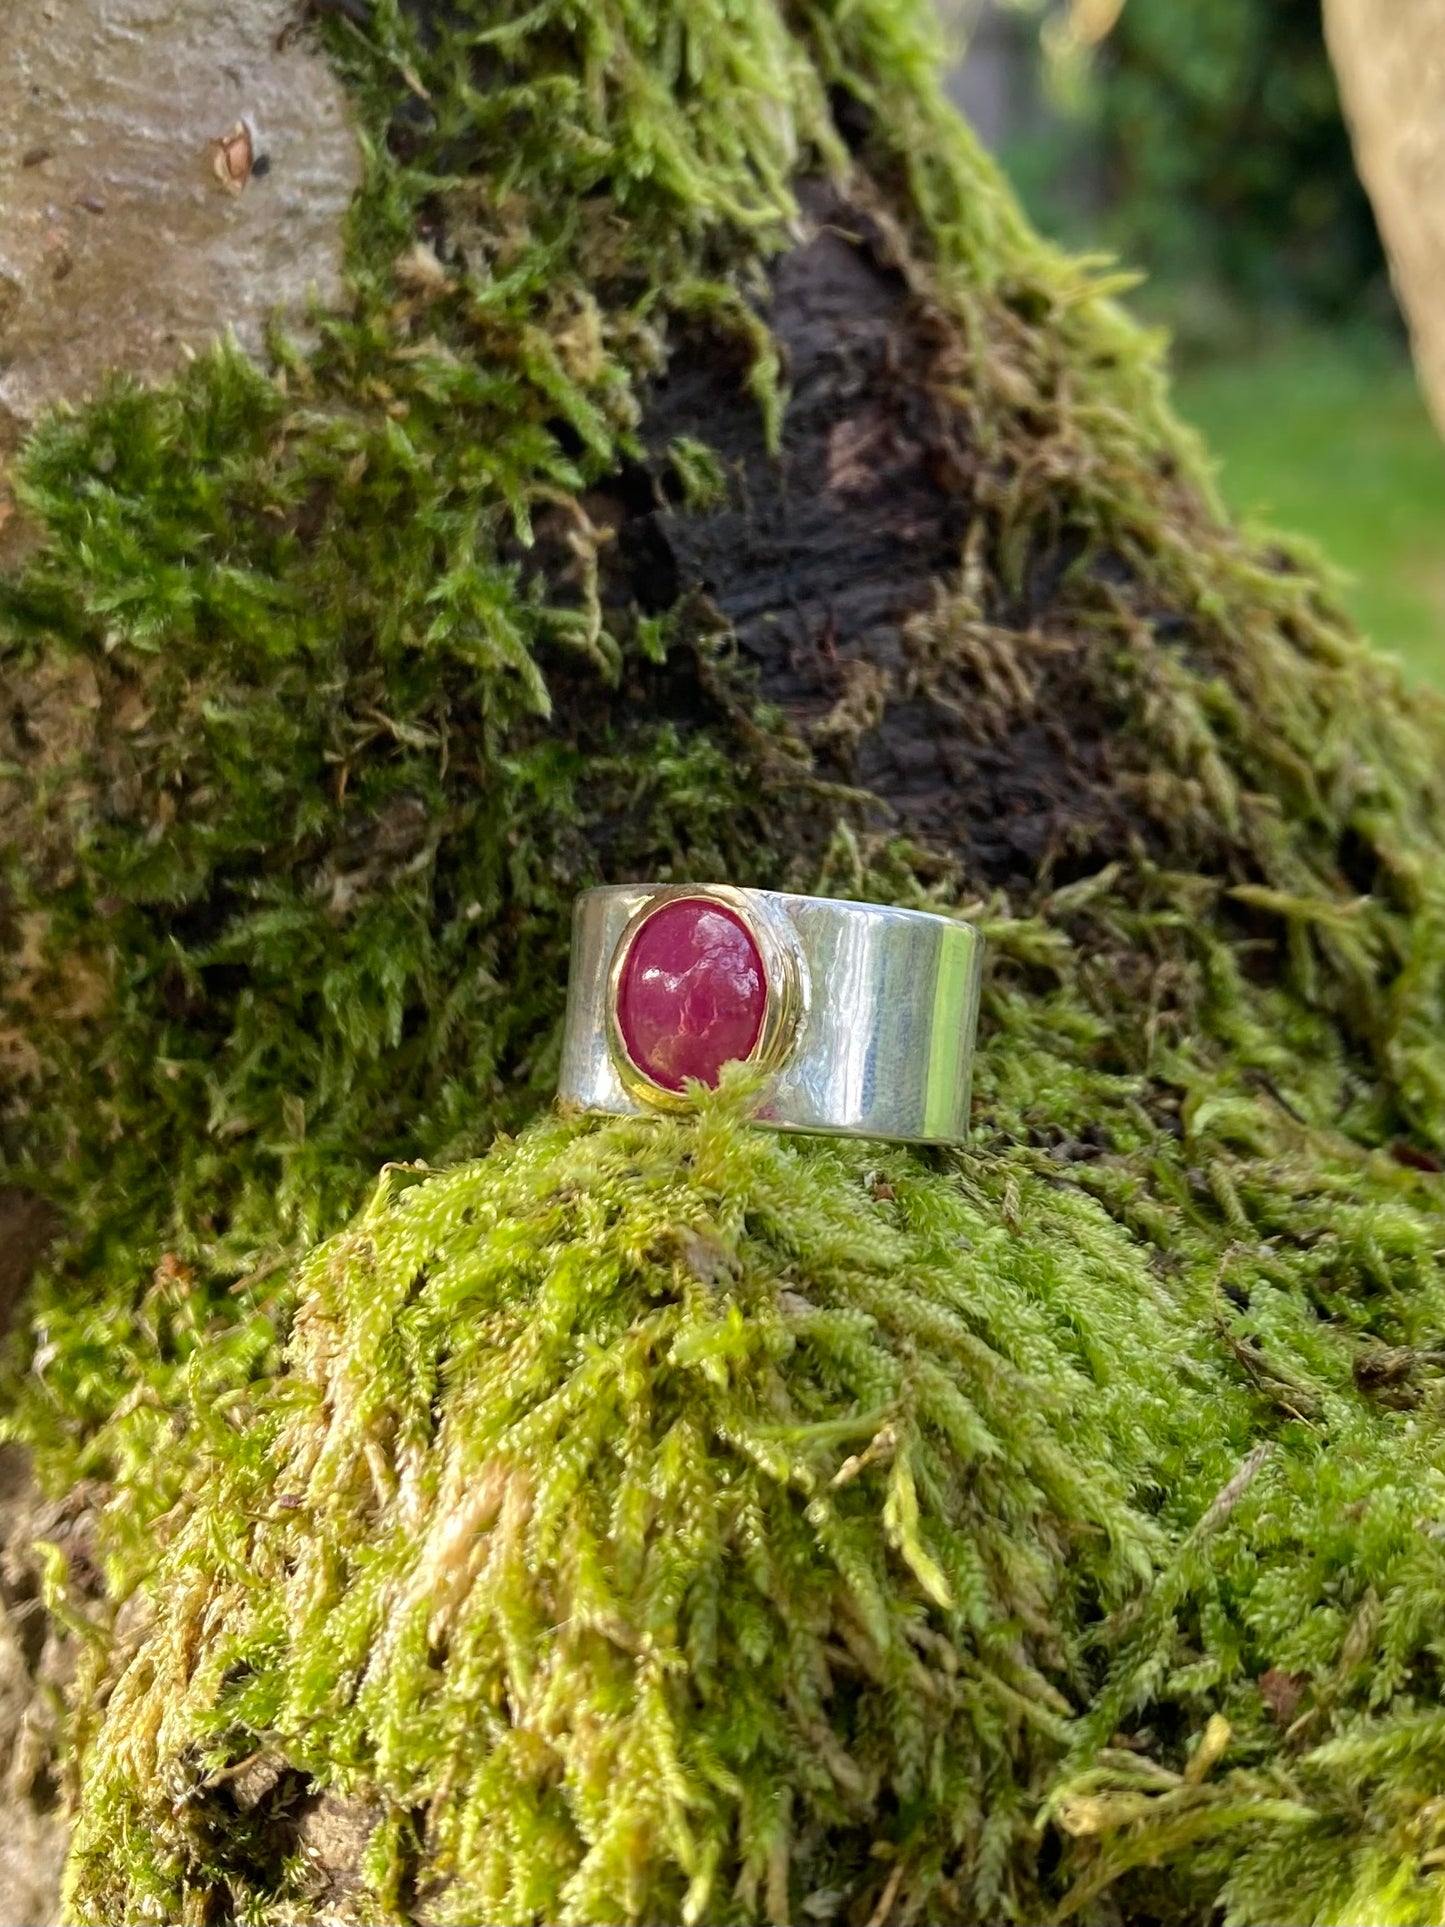  wide silver ring with large oval cabochon red ruby set in yellow gold, resting on moss